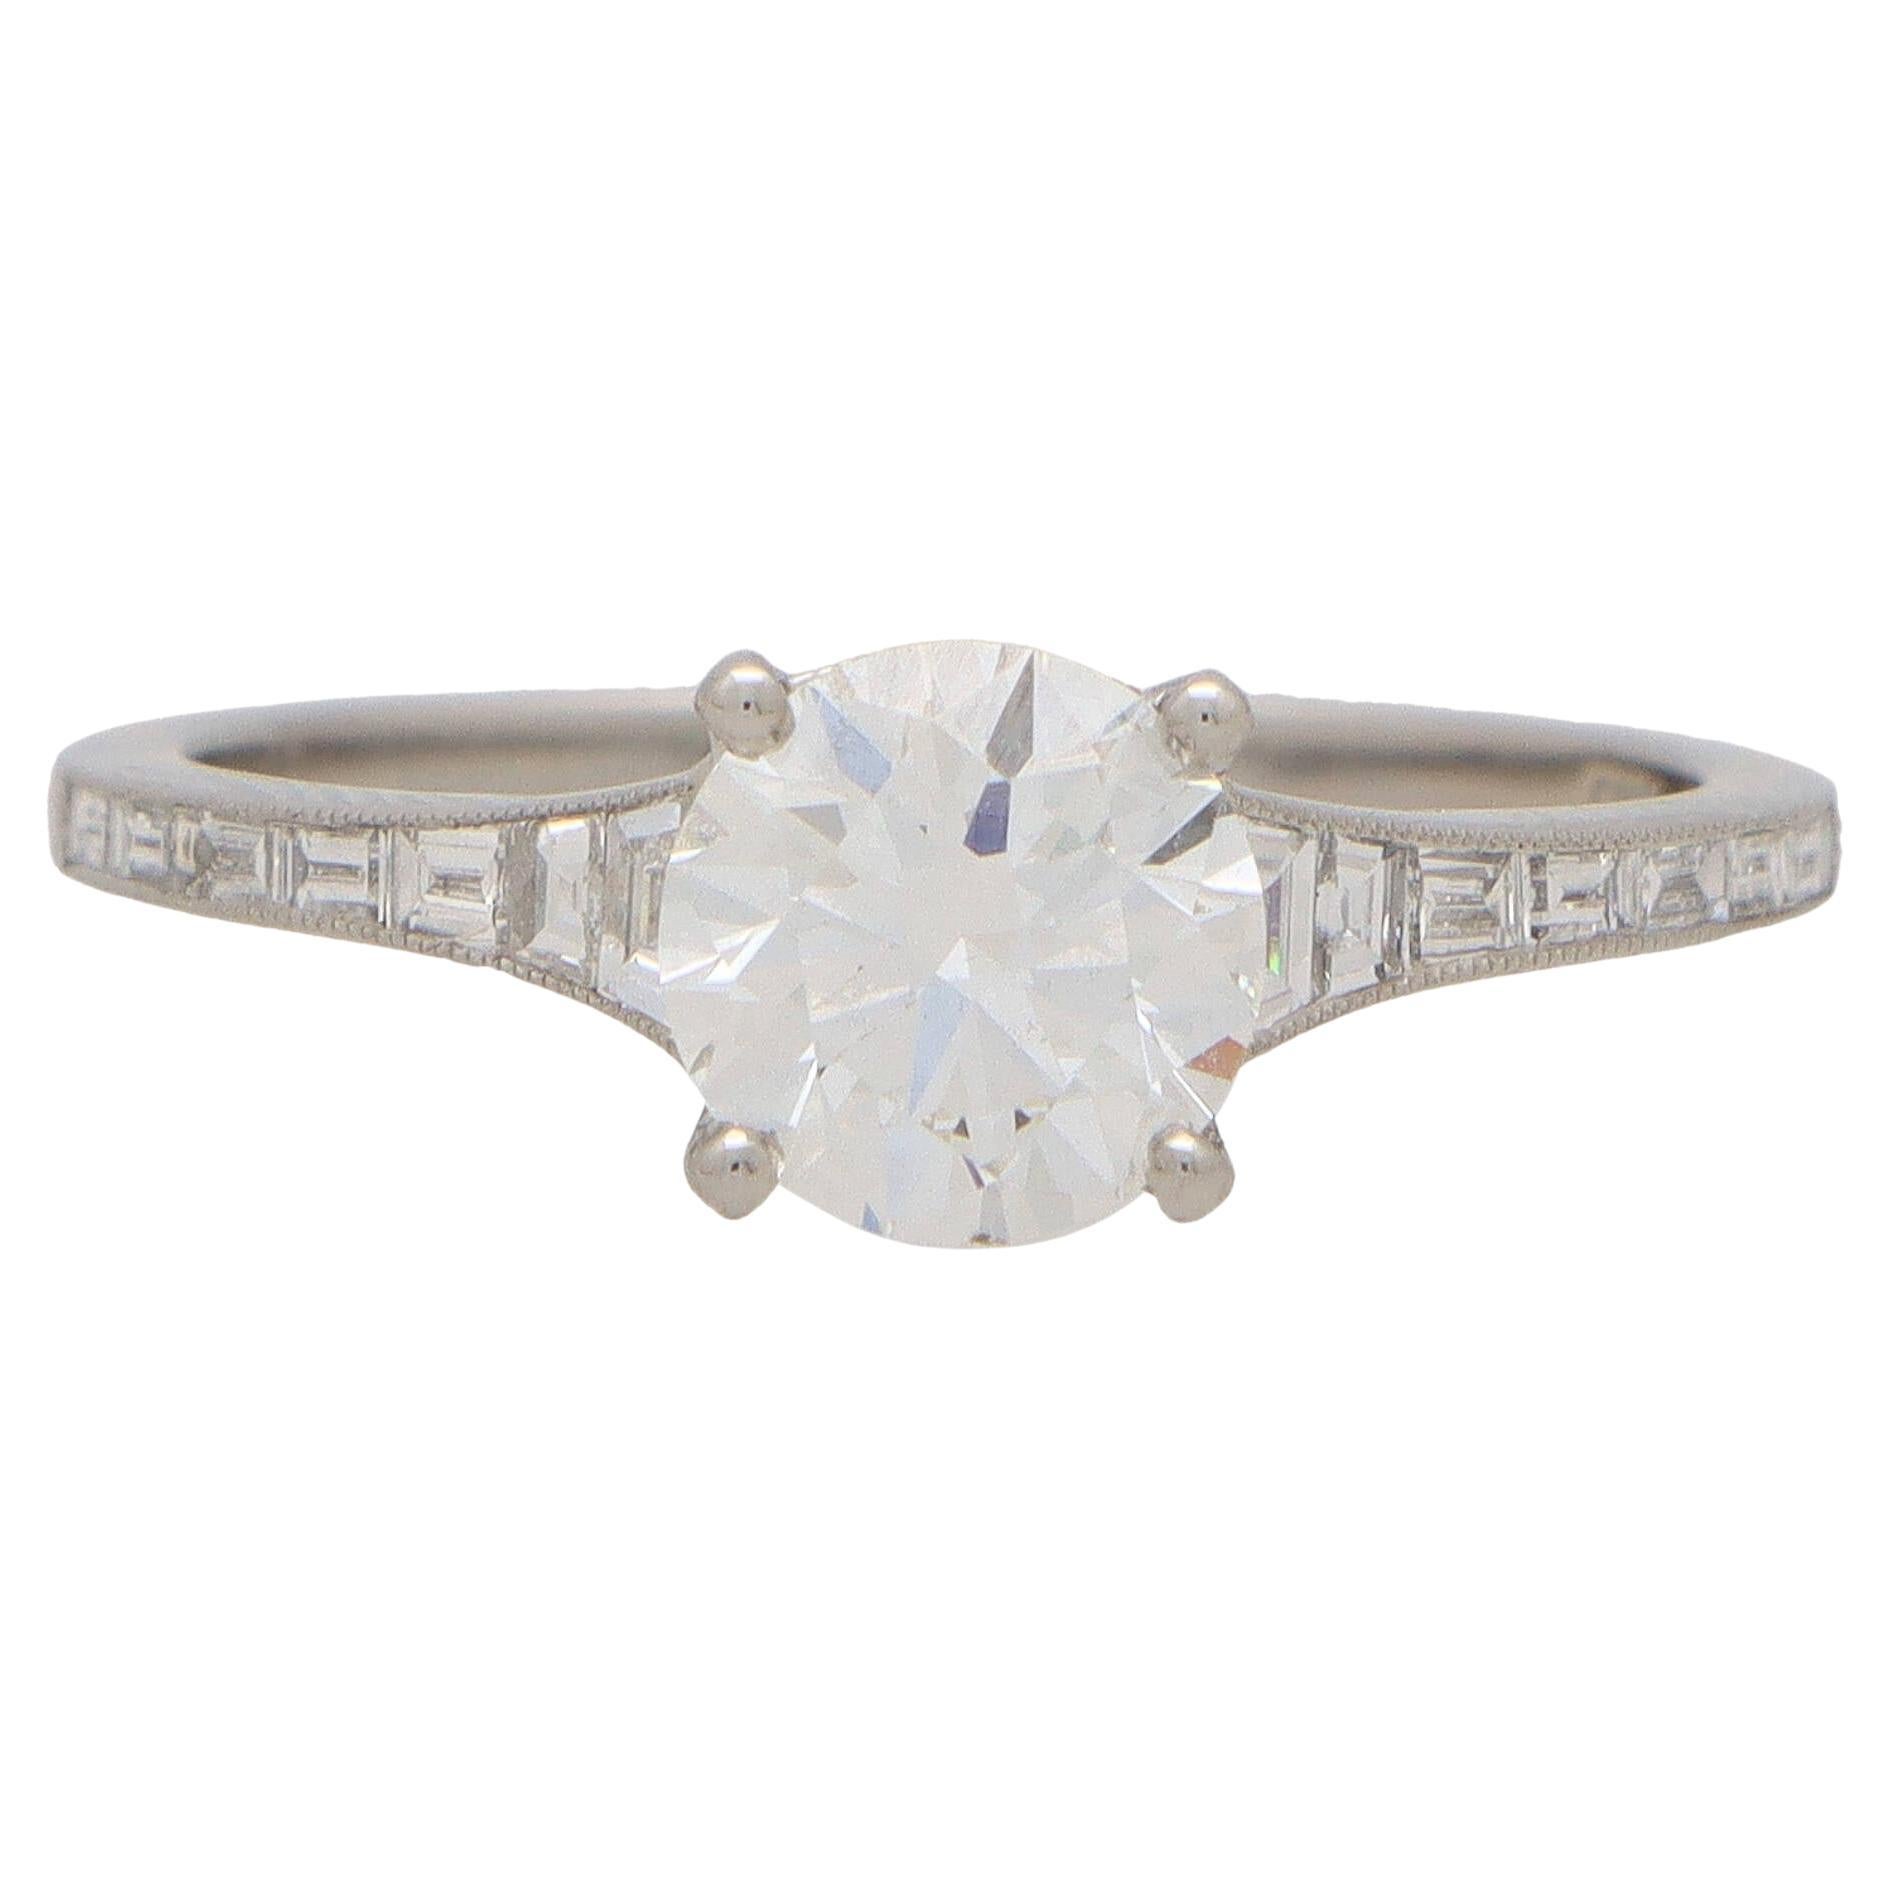 Art Deco Inspired Round Diamond Ring with Baguette Shoulders Set in Platinum